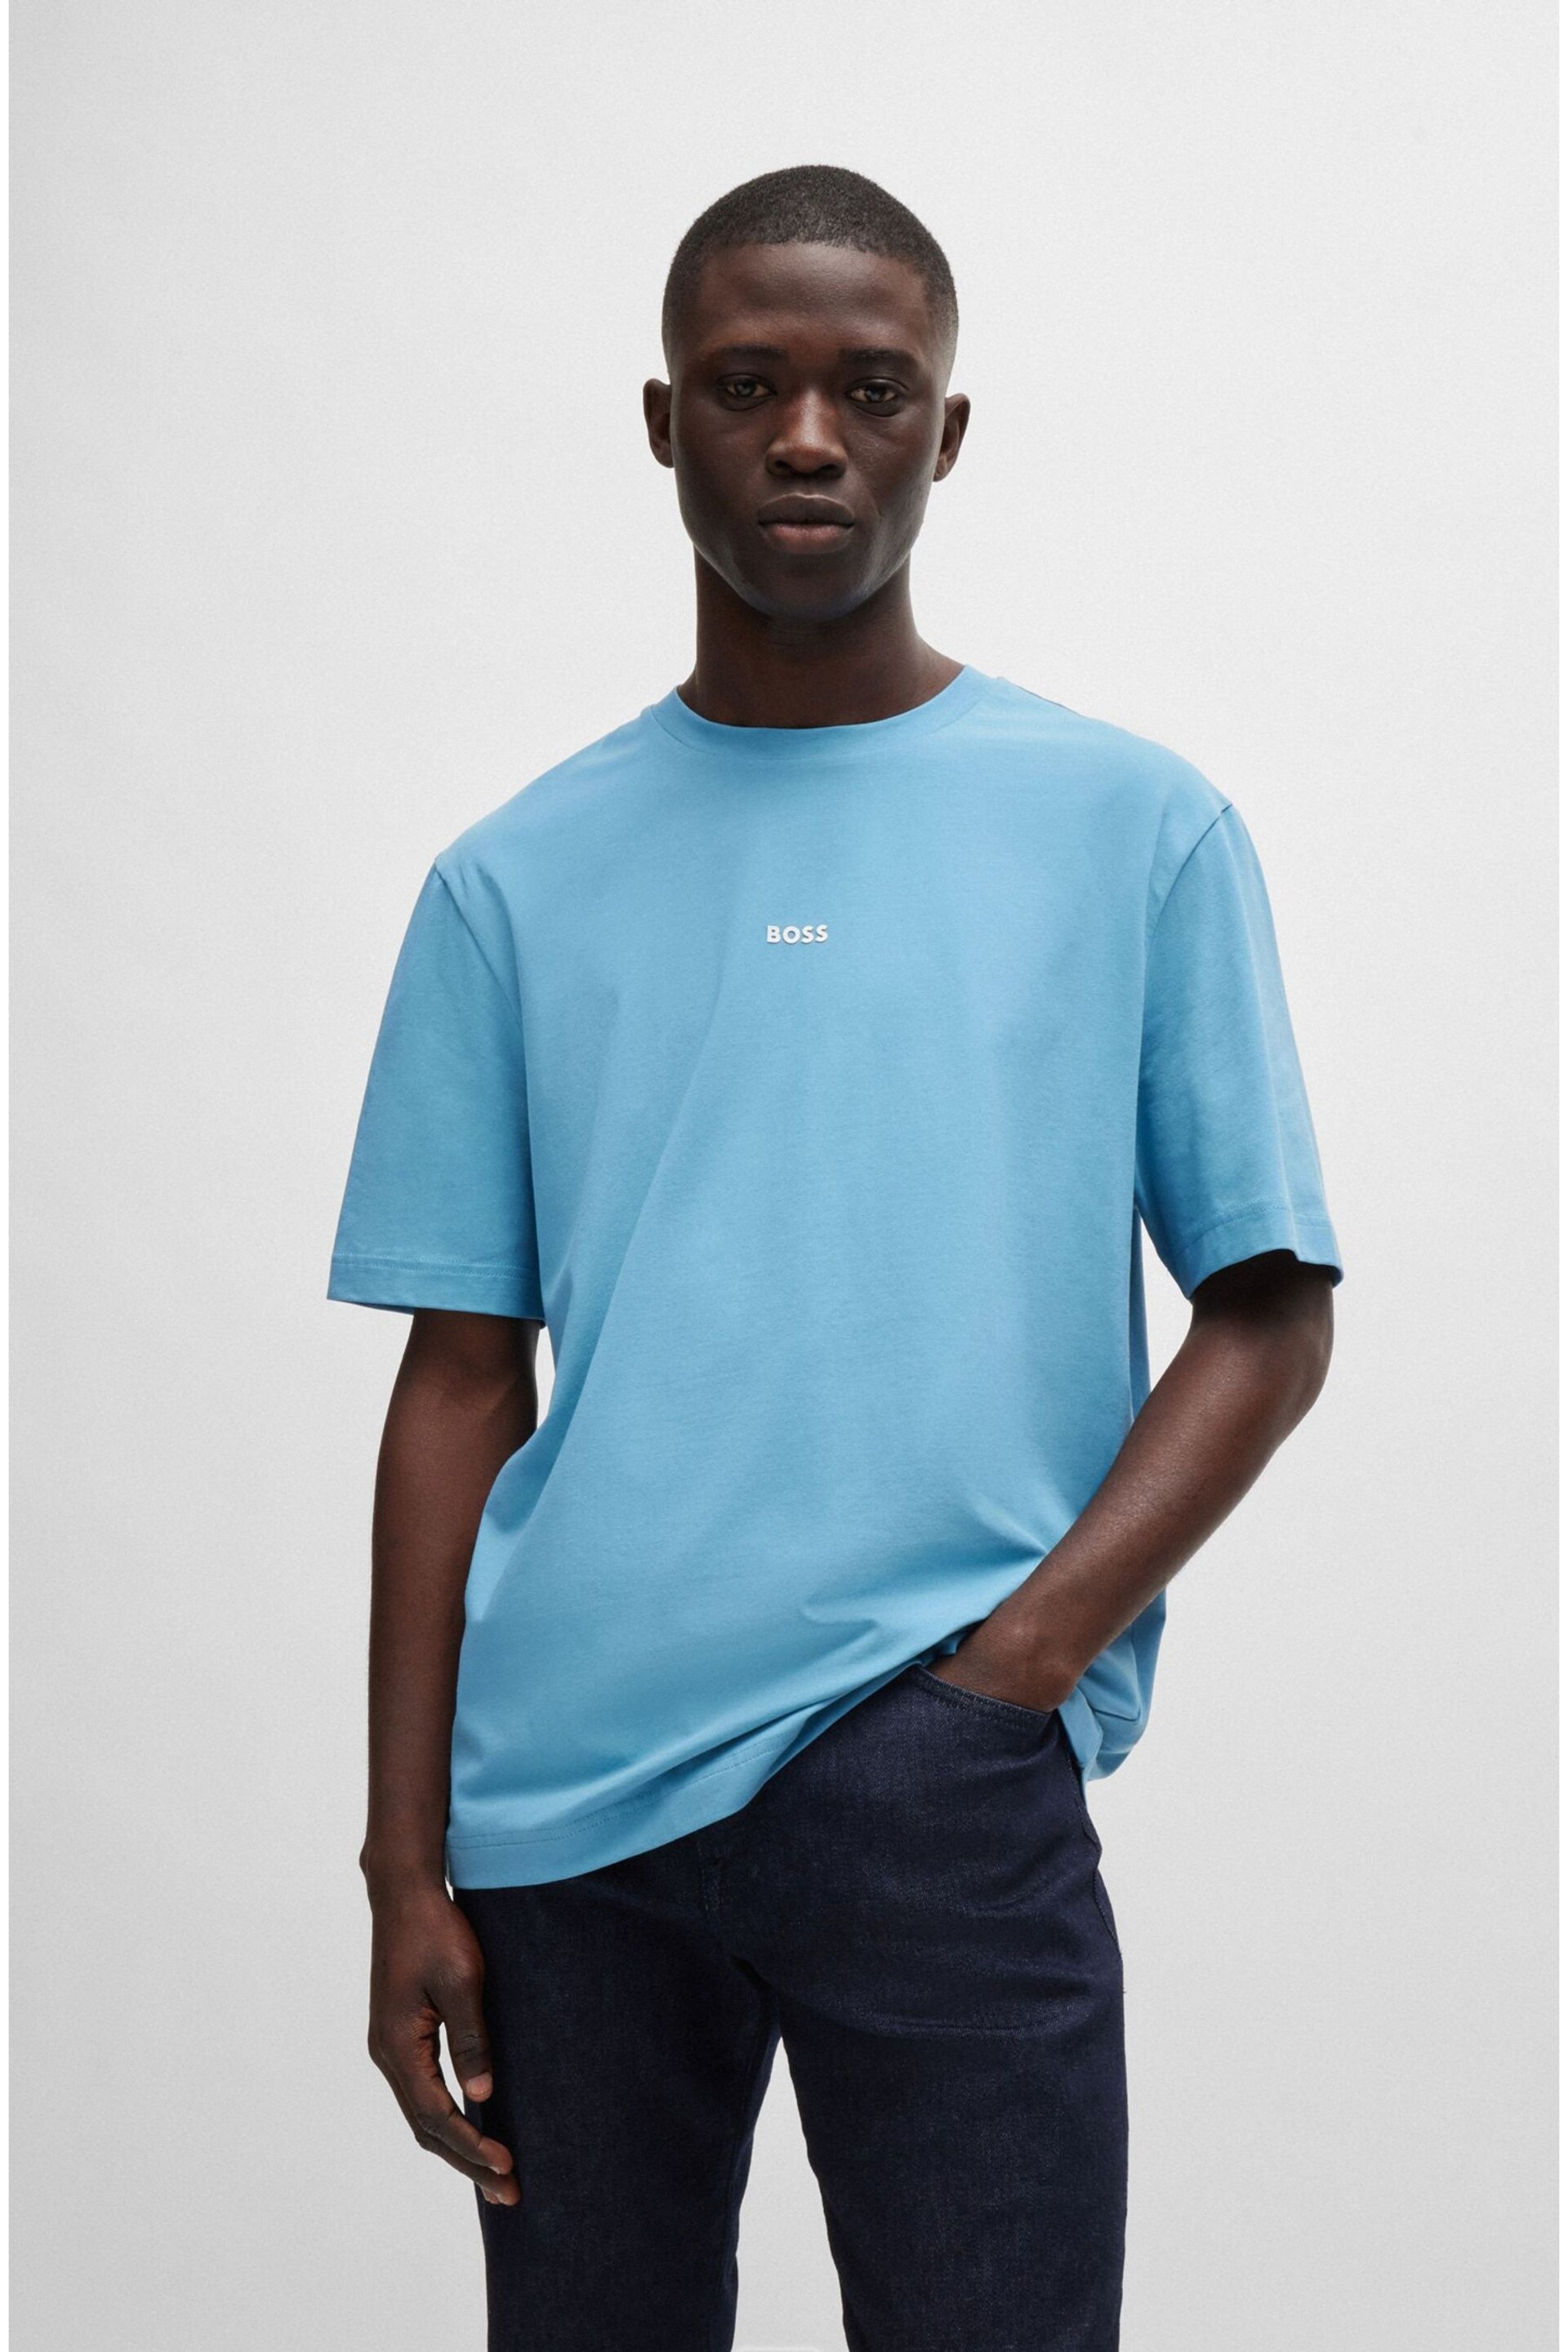 BOSS Blue Relaxed-Fit T-Shirt in Stretch Cotton With Logo Print - Image 1 of 5